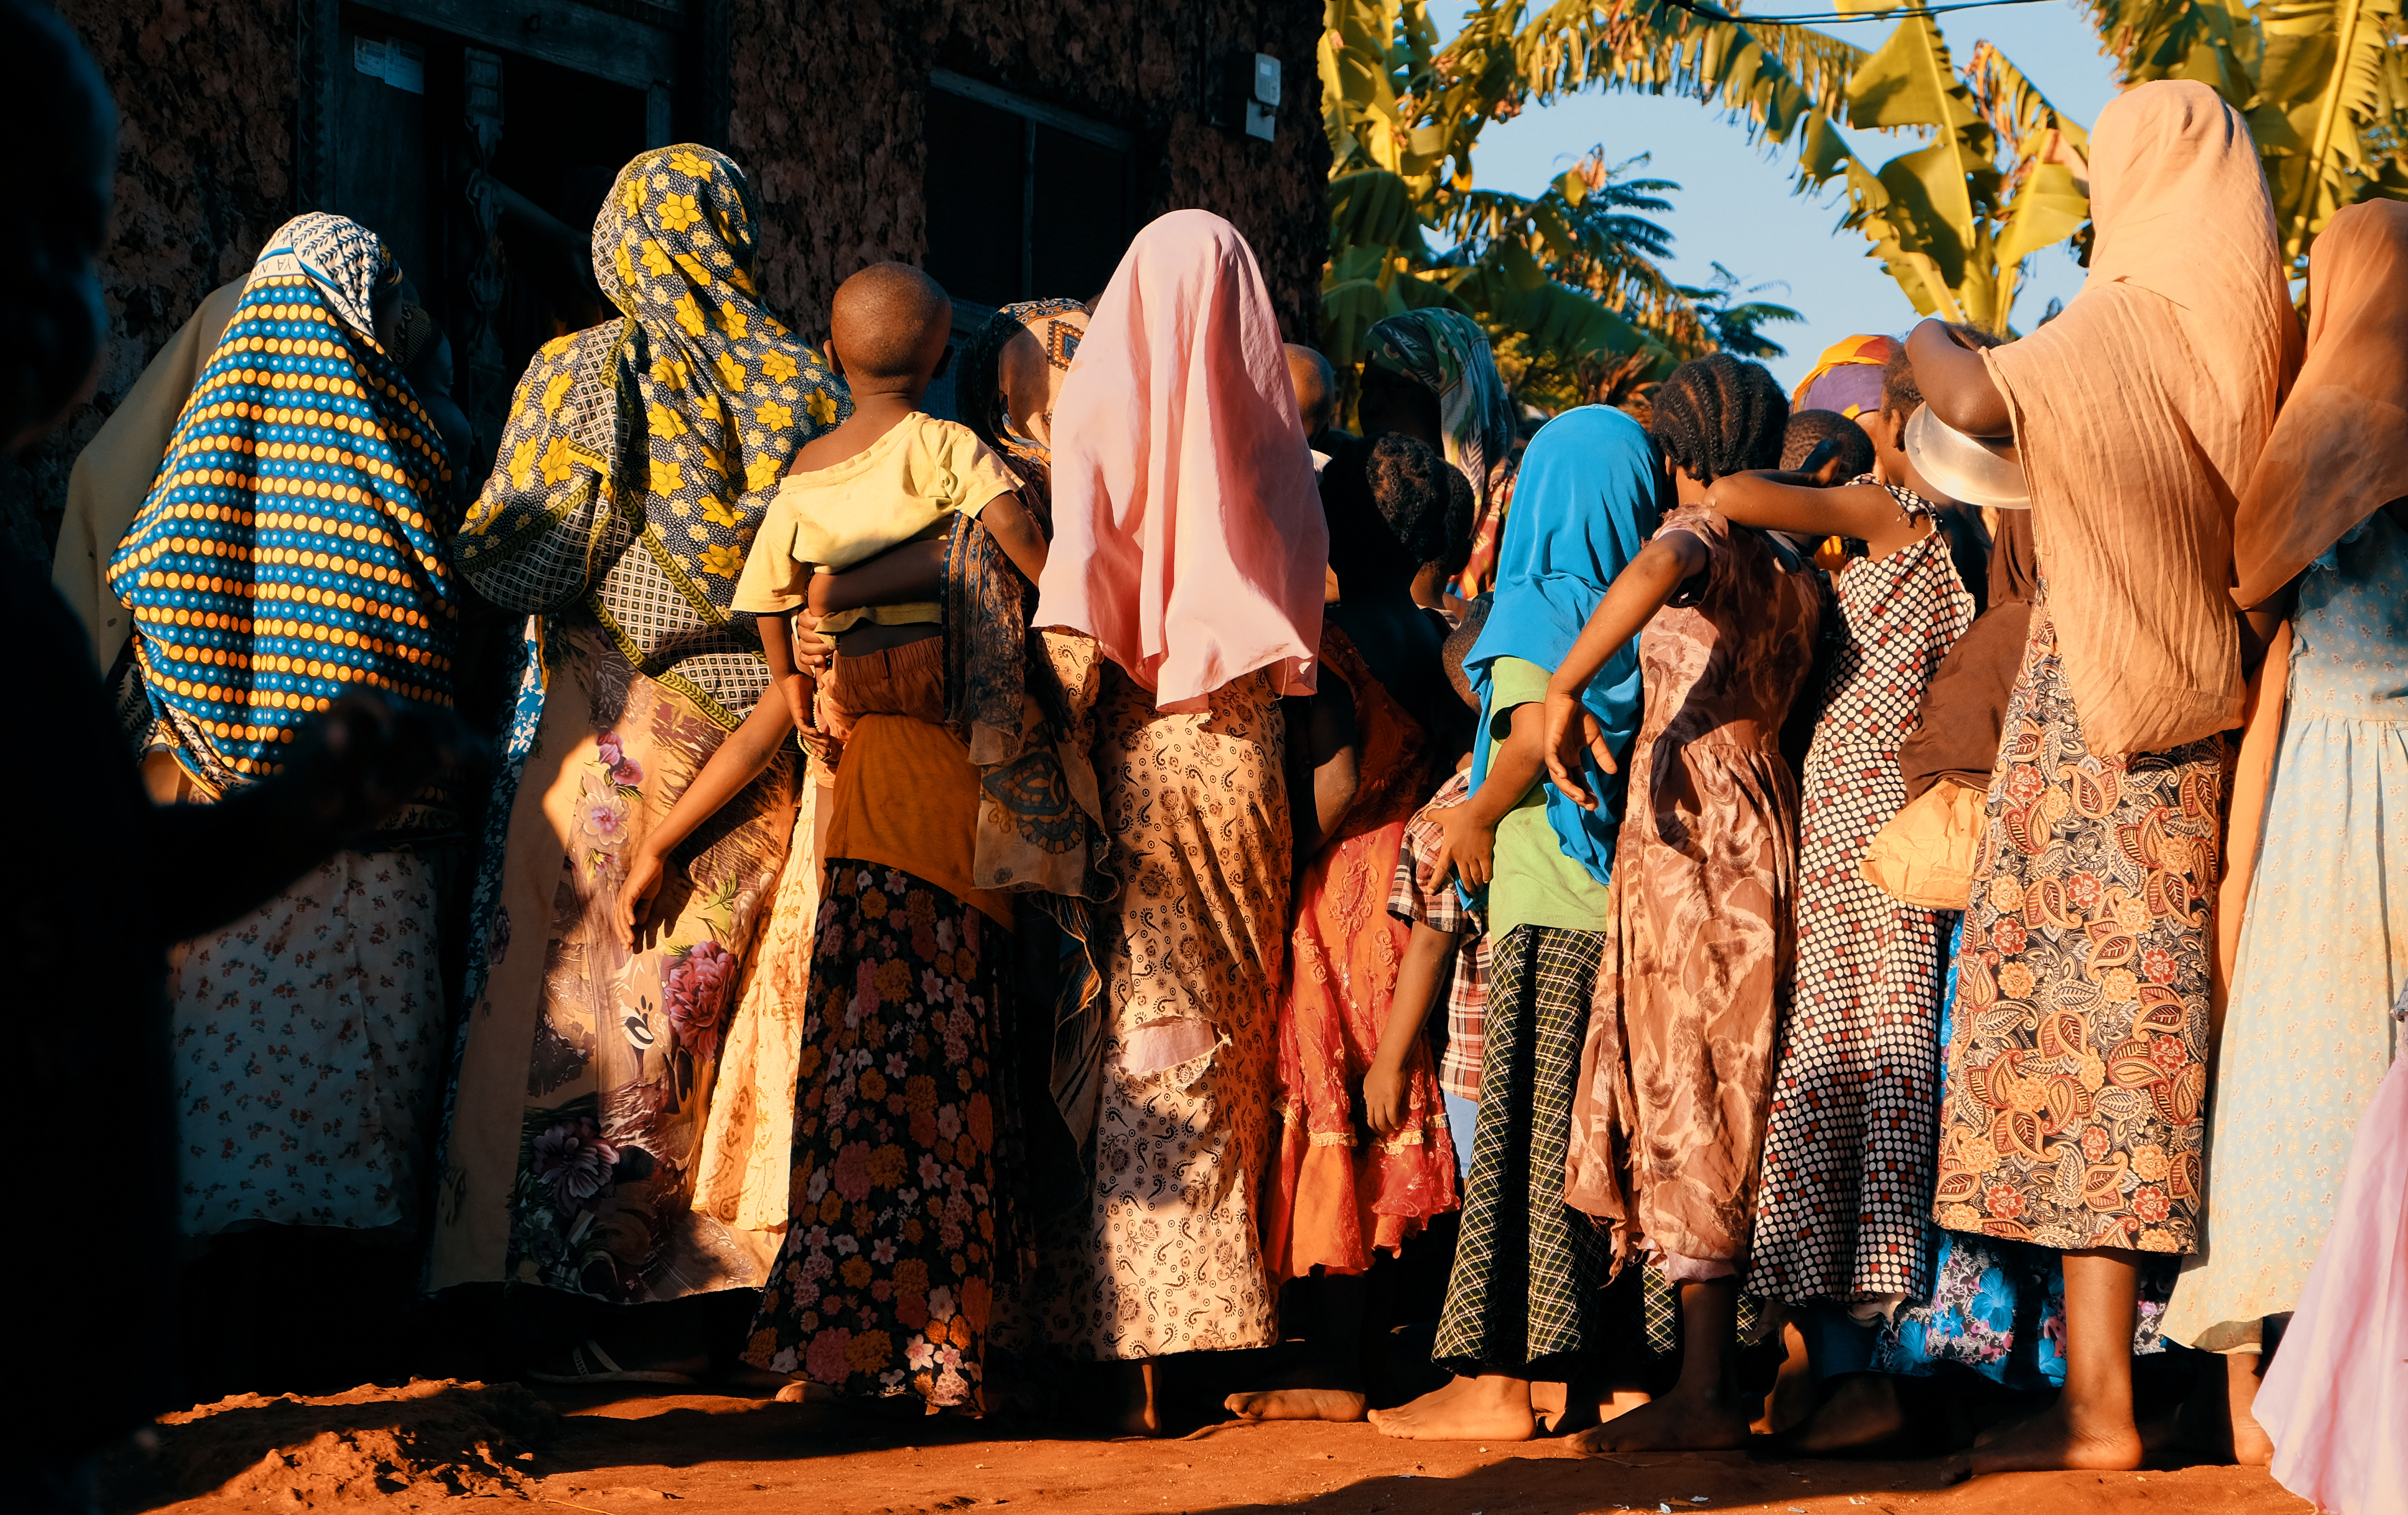 Image of several women and children standing in line outside a building.